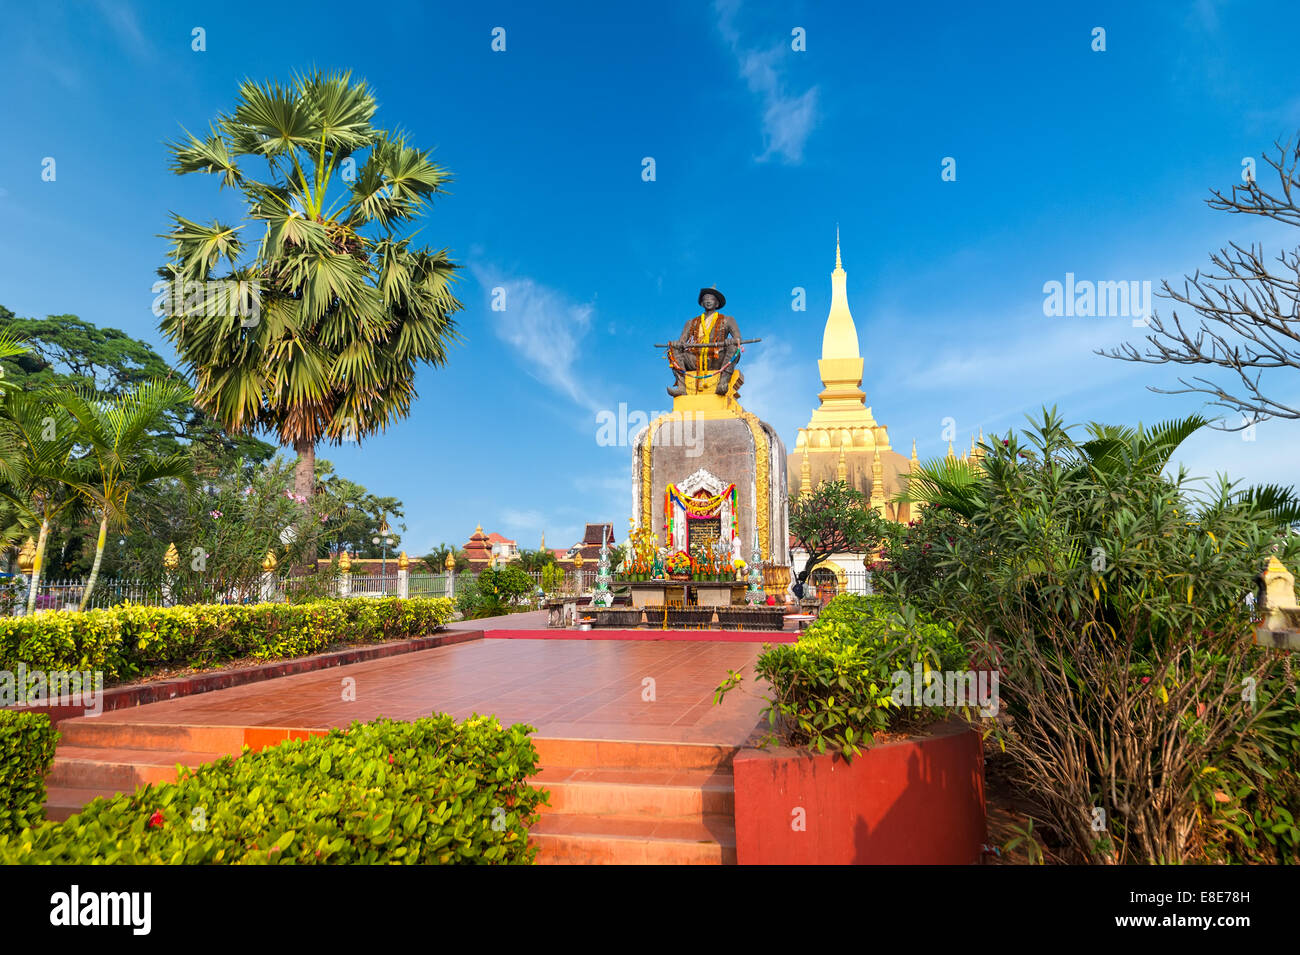 King Setthathirath statue and Pha That Luang Pagoda Vientiane, Laos travel landscape and destinations Stock Photo